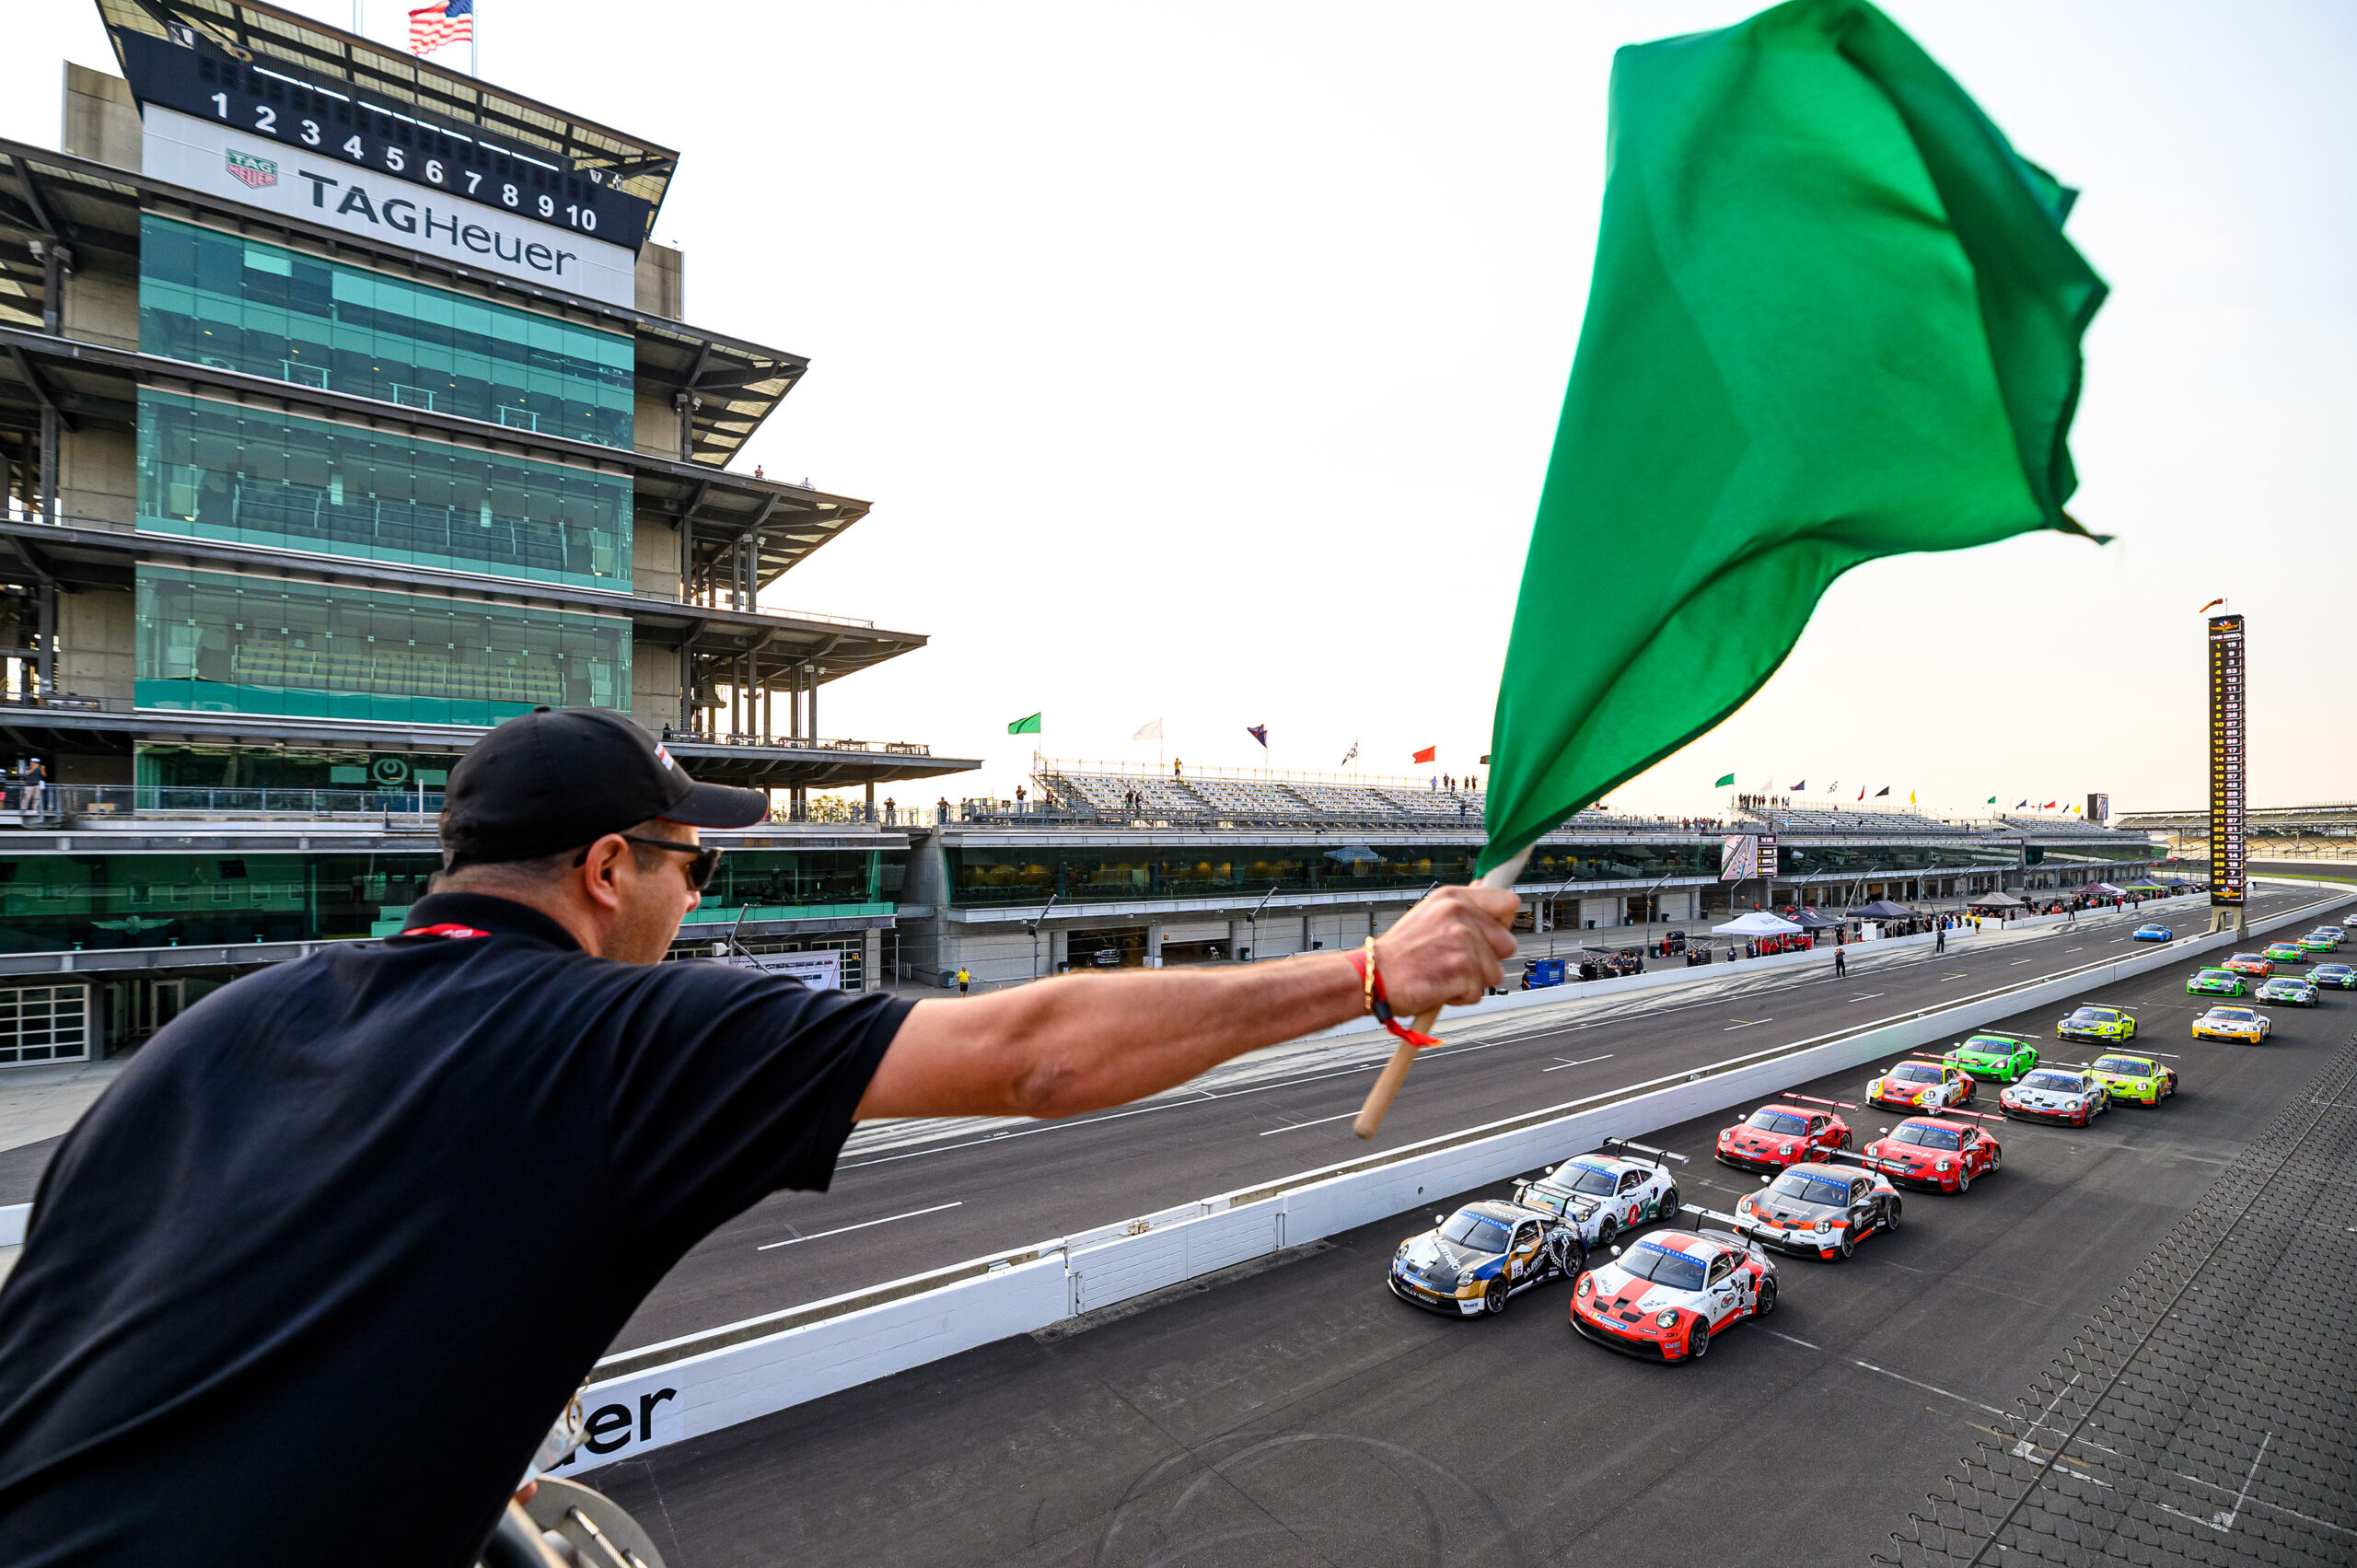 Porsche Carrera Cup North America headlining on track action at Sports Car  Together Fest at Indianapolis Motor Speedway – Shifting Lanes